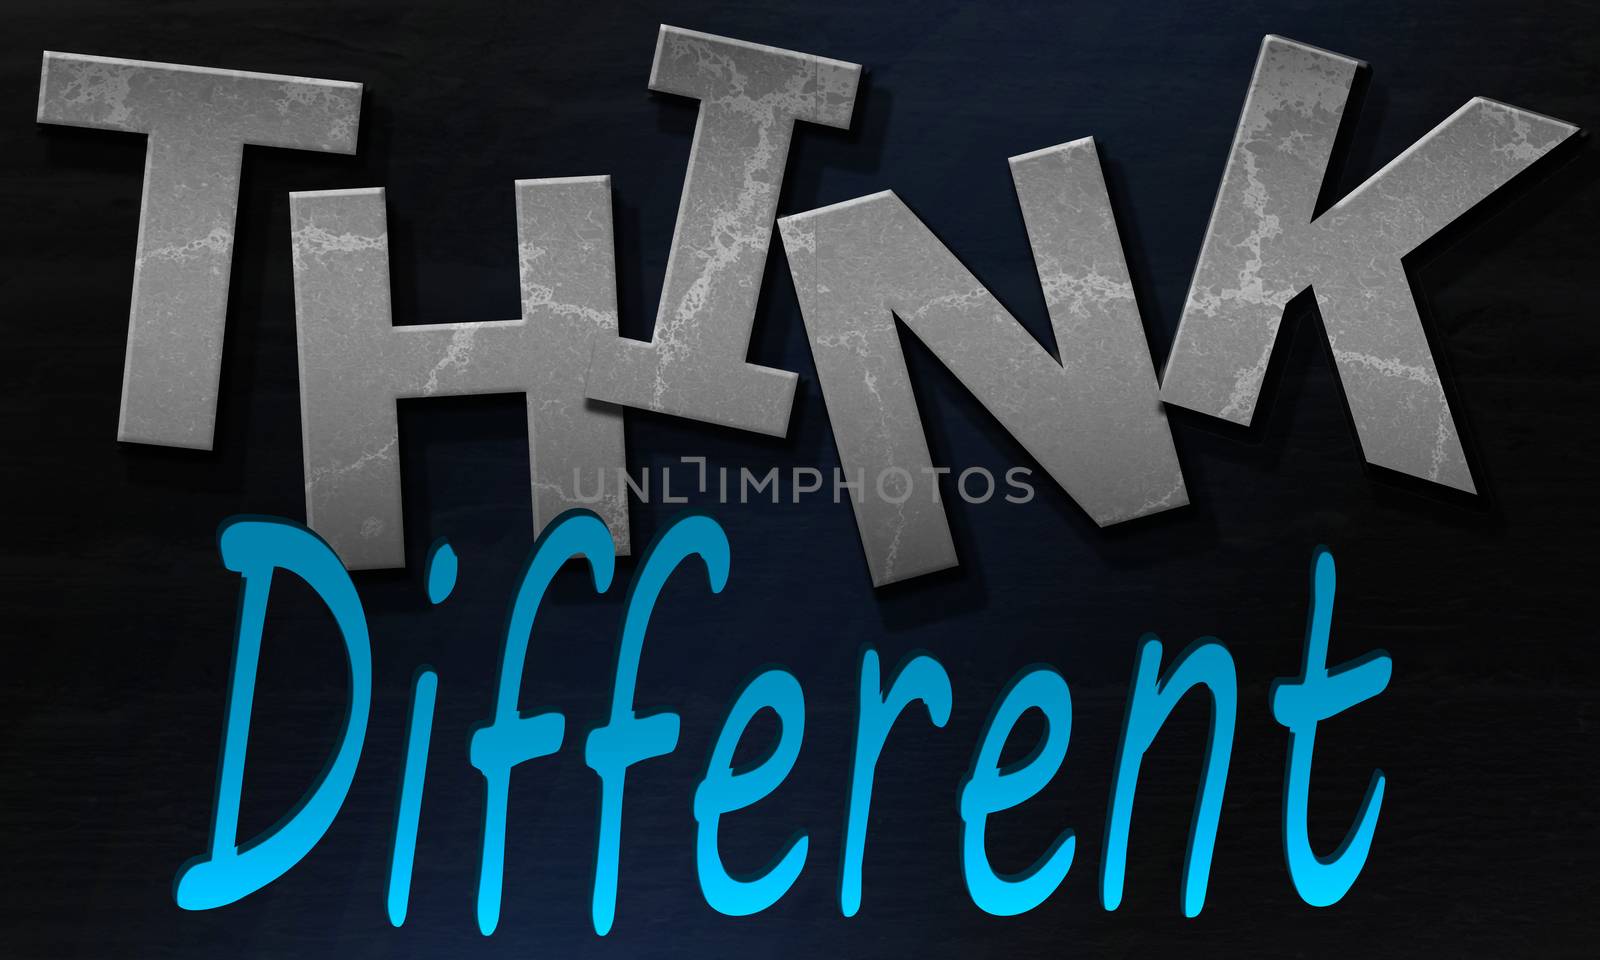 Think different inspirational quote and text by tang90246